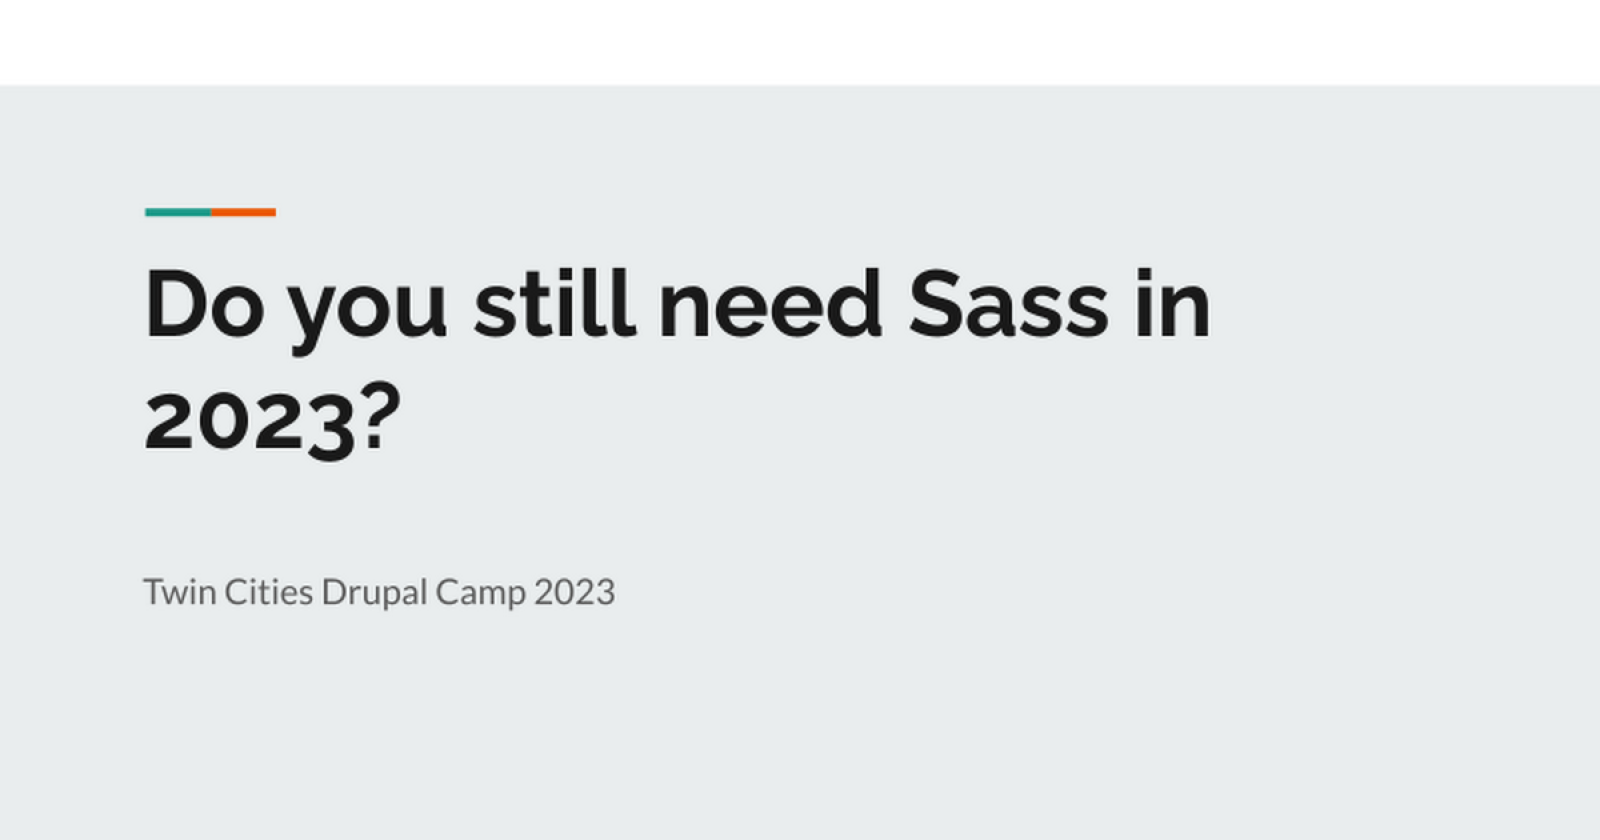 Do you still need Sass in 2023?